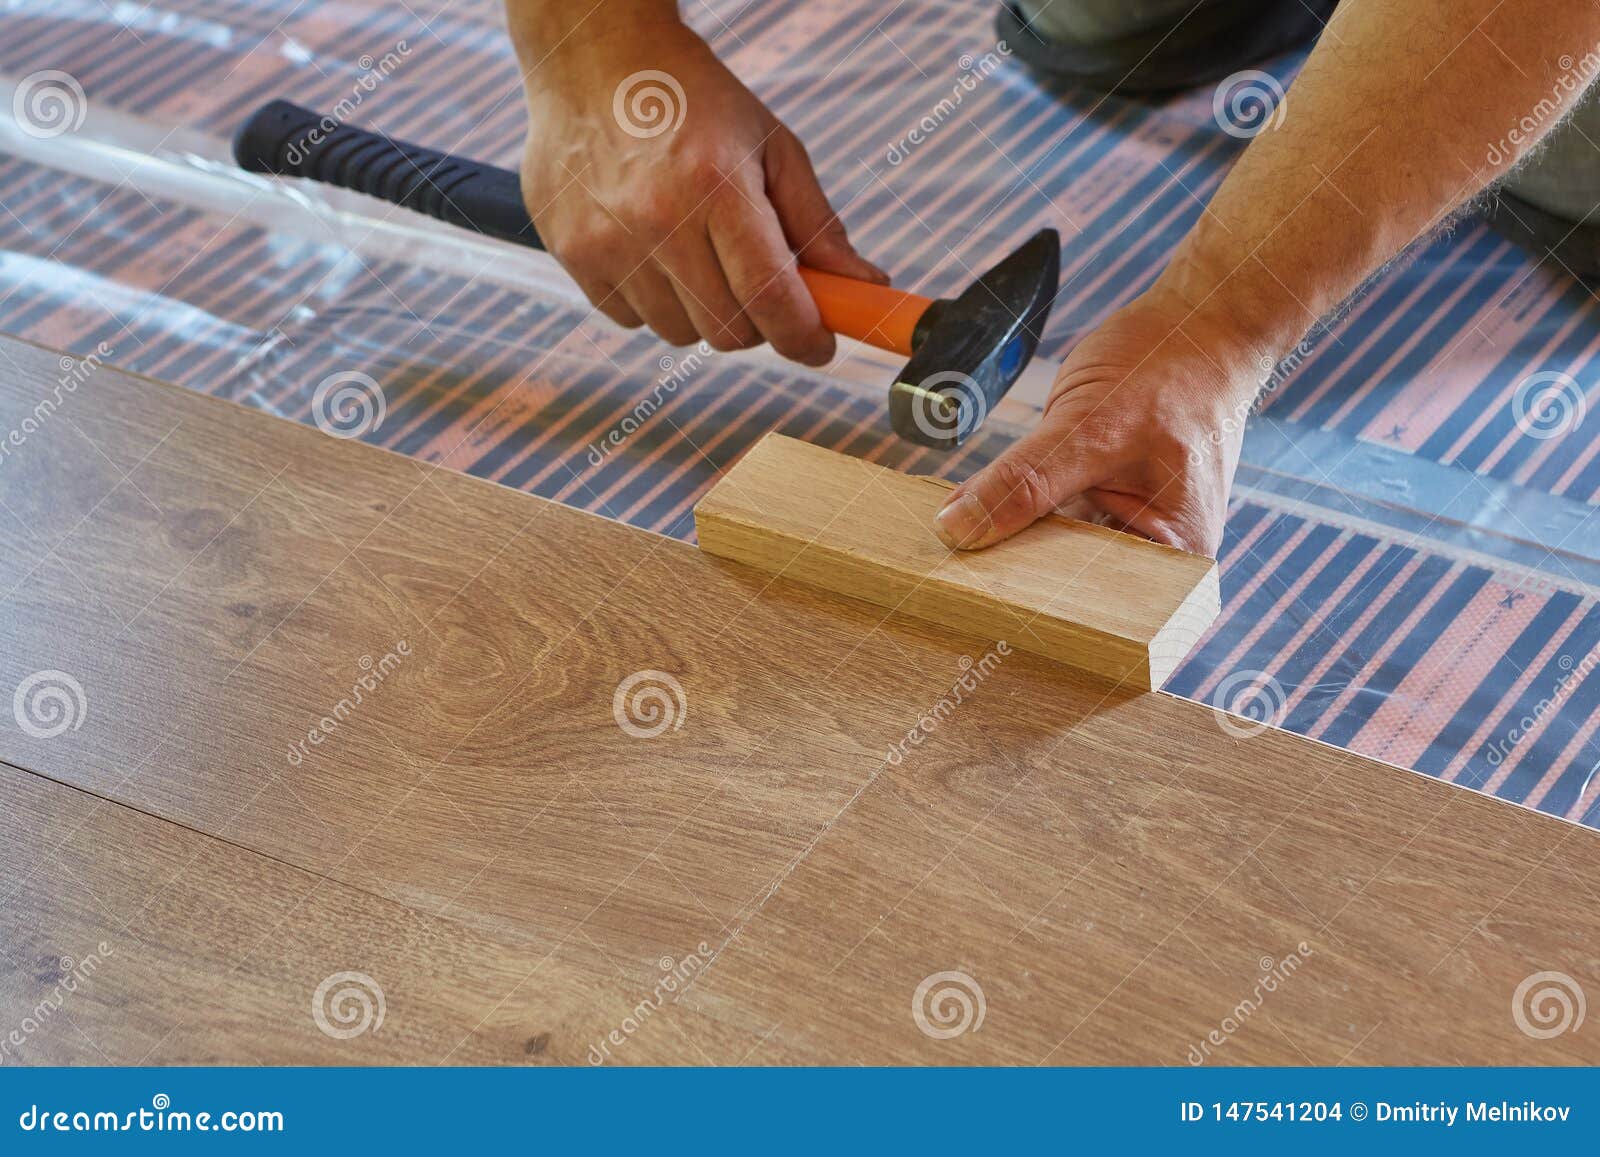 Laying Laminate Covering On Heat Insulated Floor Stock Photo